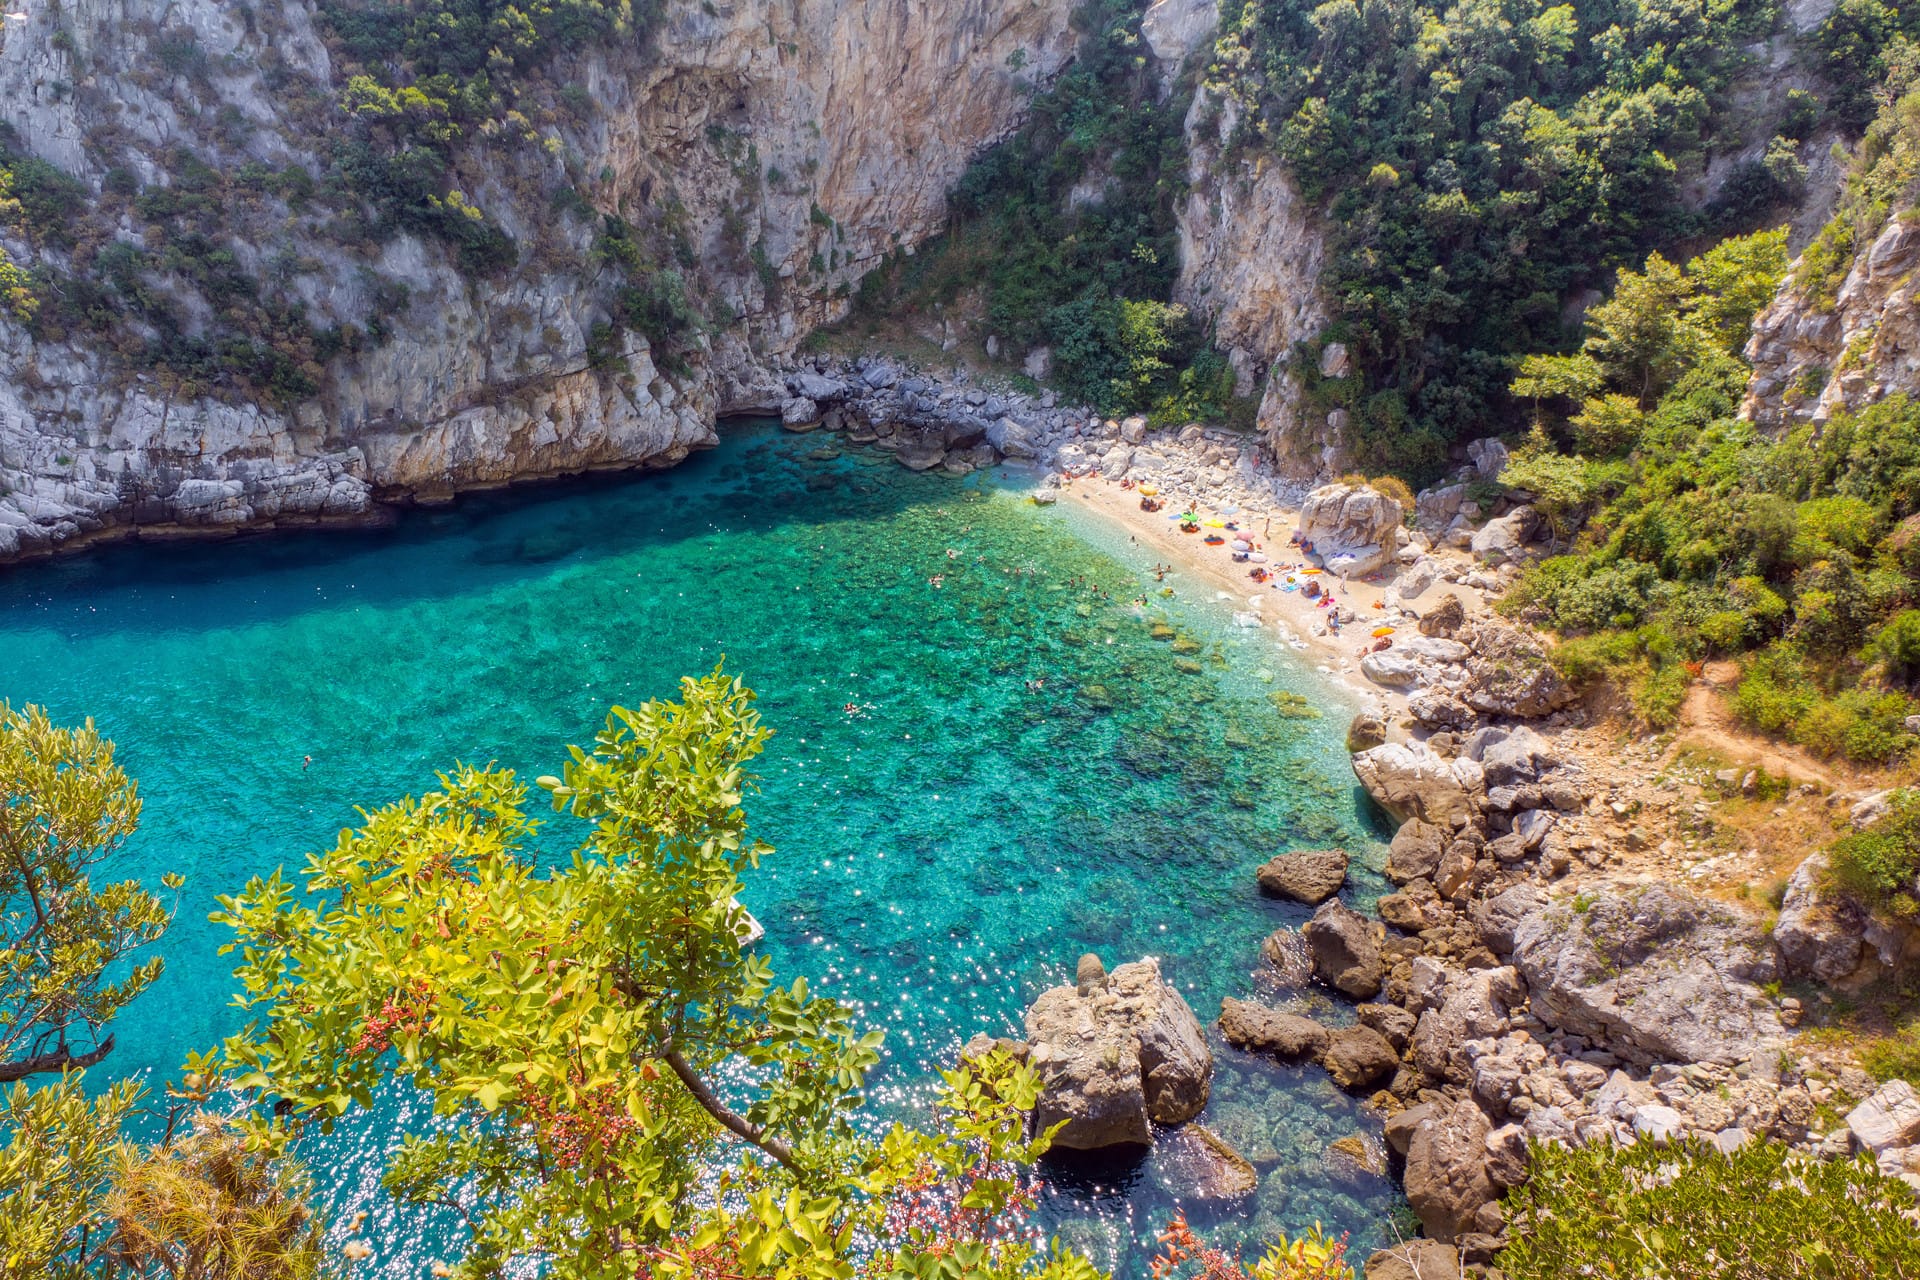 Fakistra is one of Pelion's most spectacular beaches